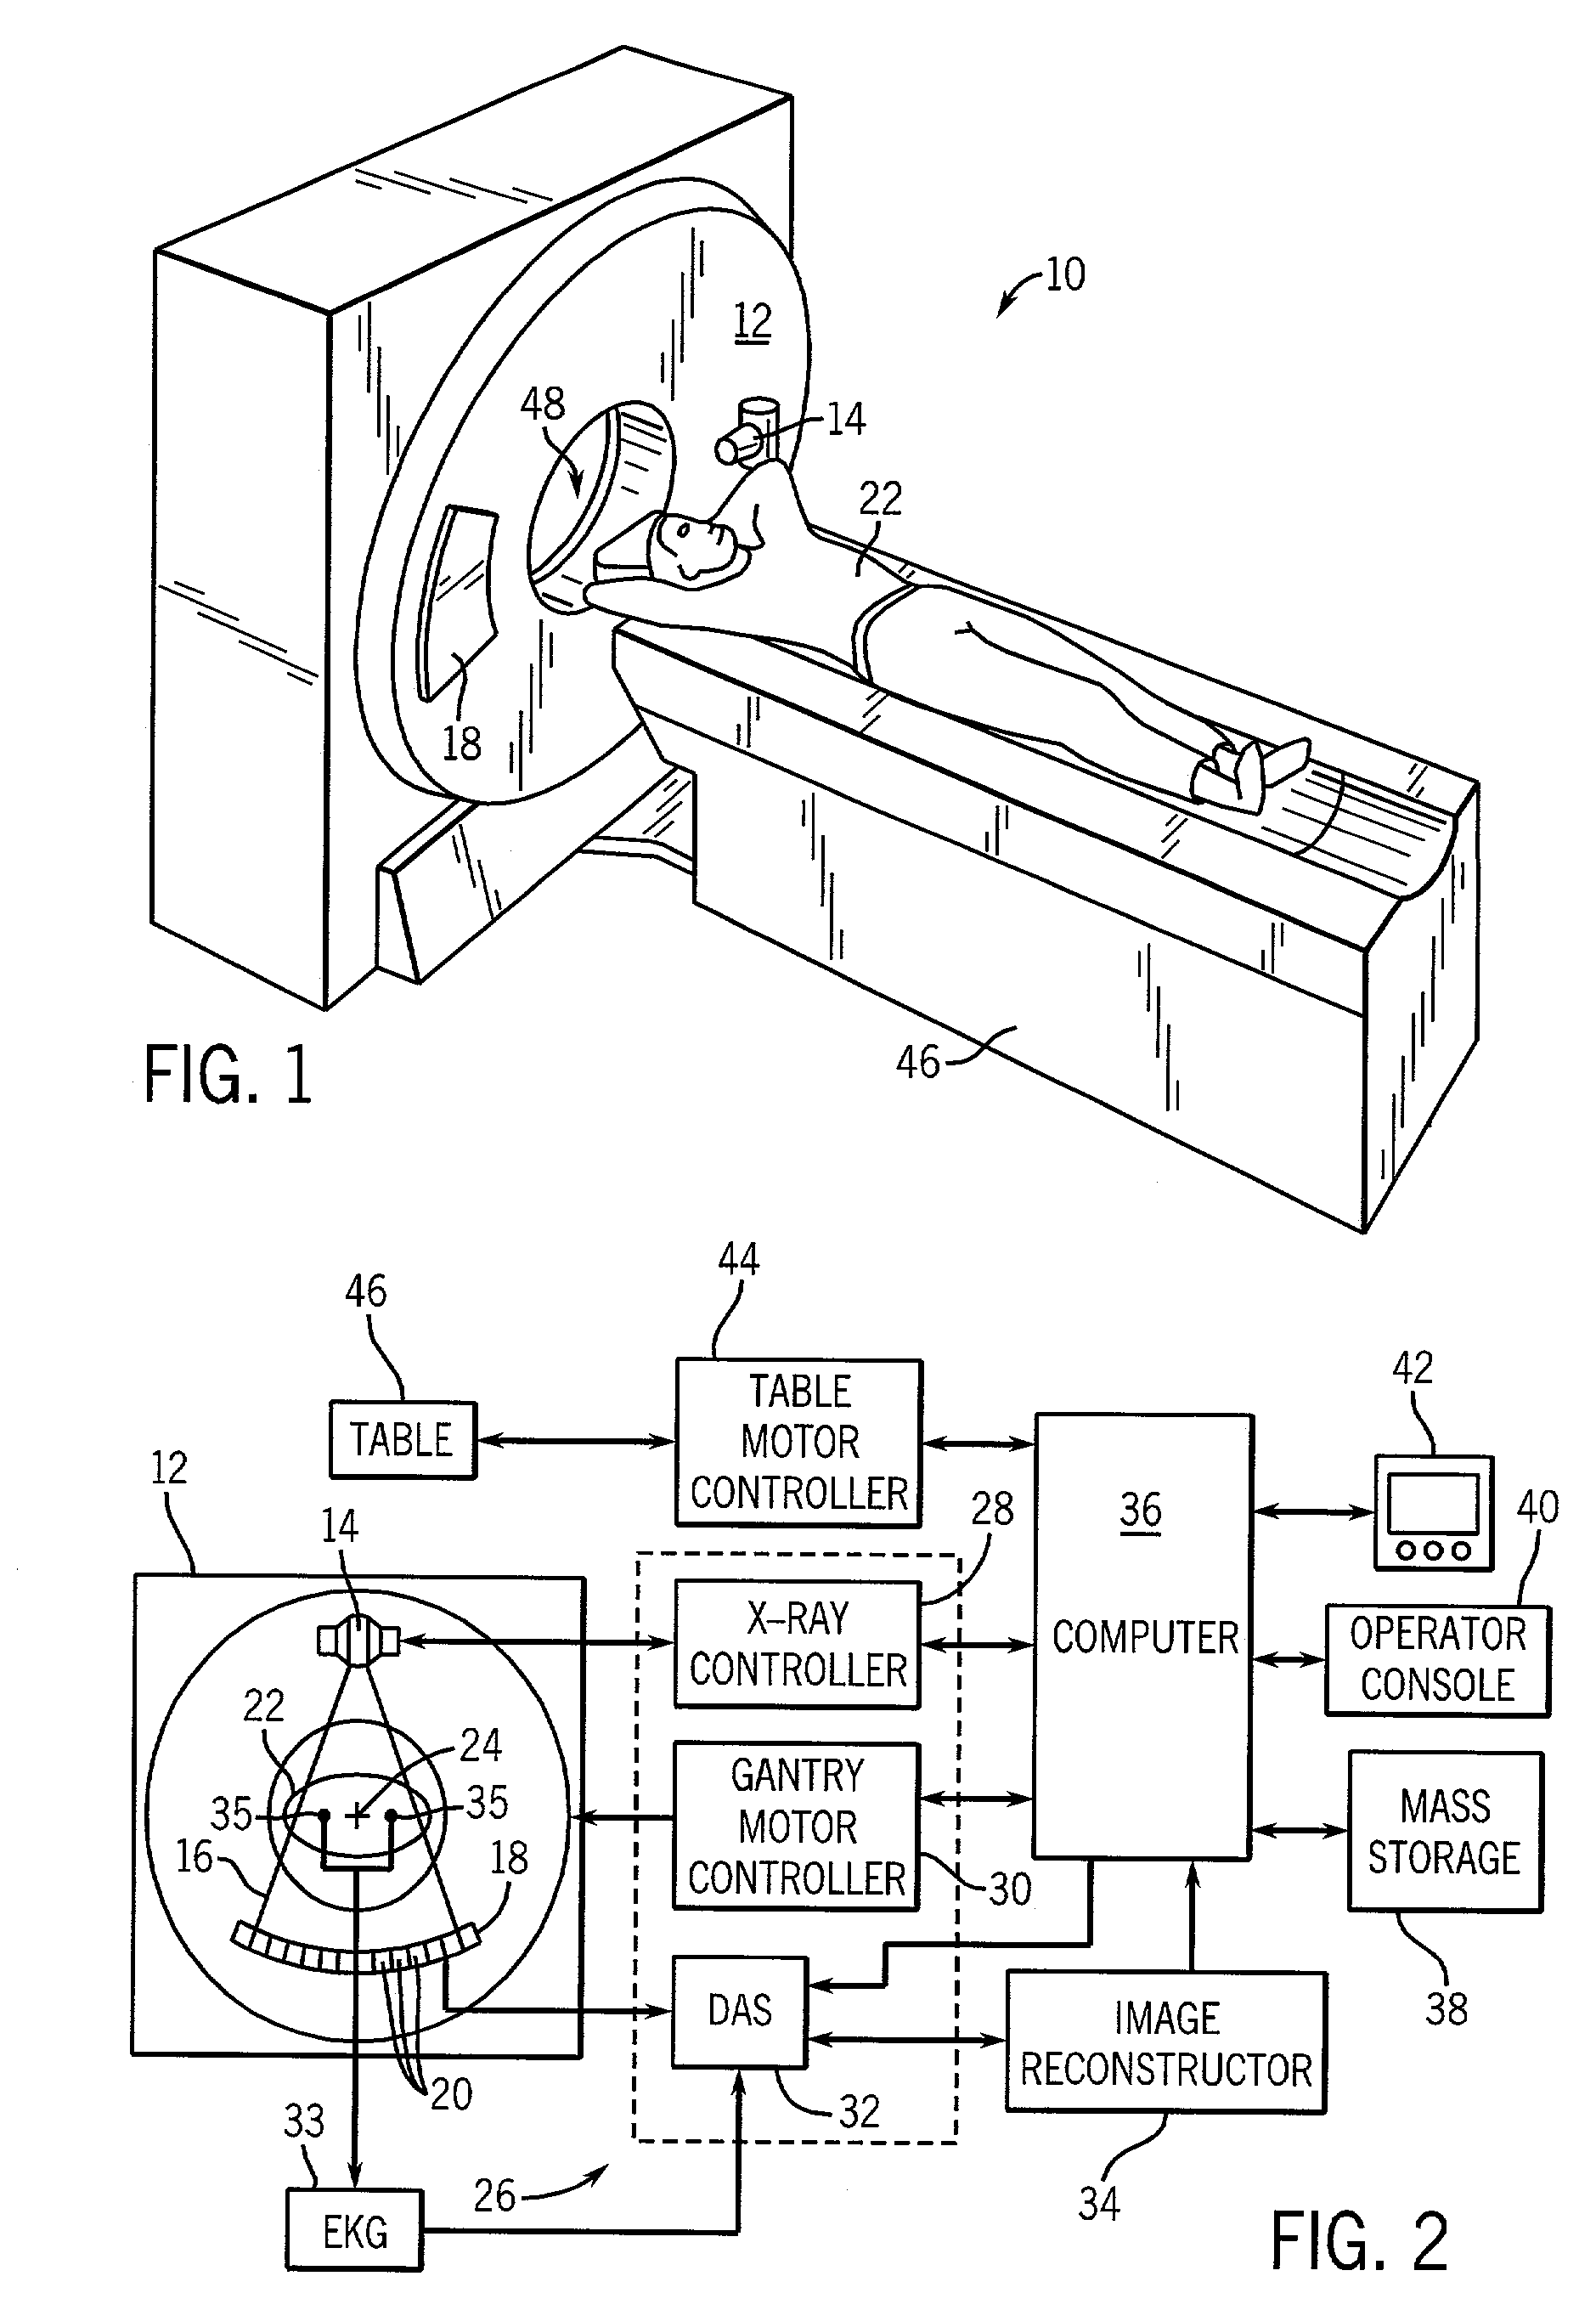 Method and apparatus of scoring an arterial obstruction